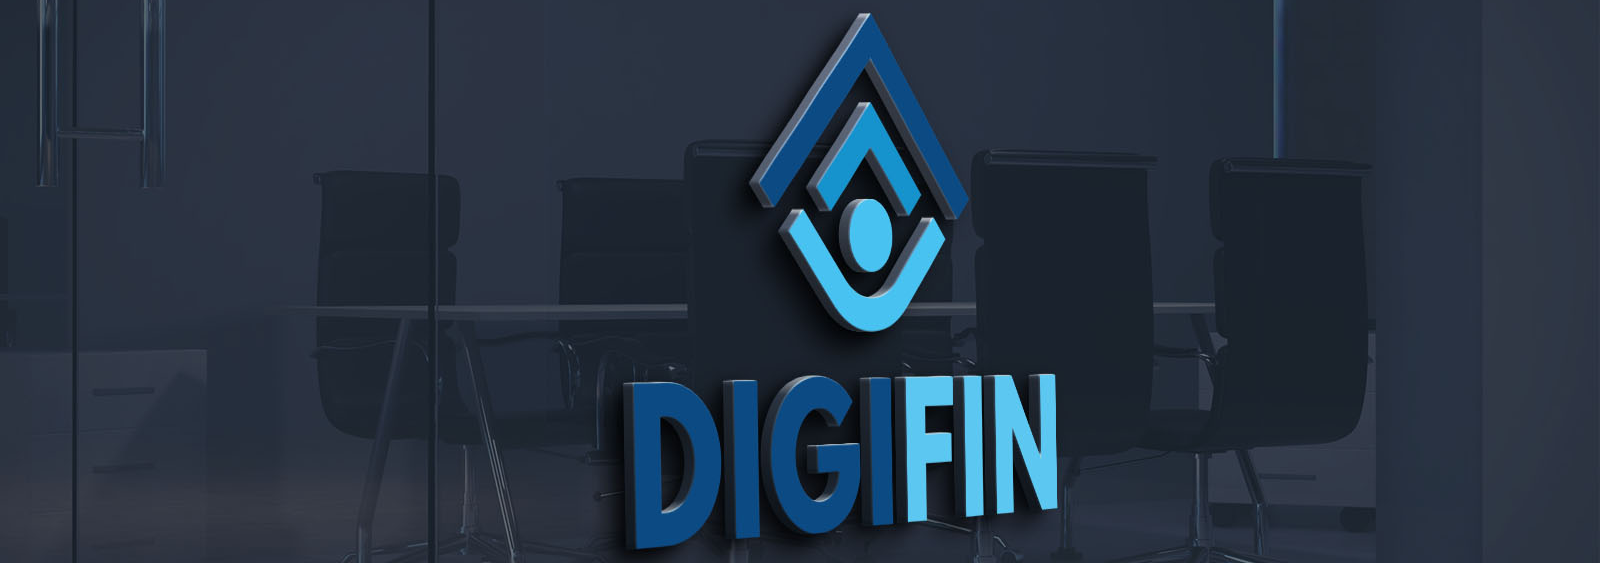 Digifin - financial consulting